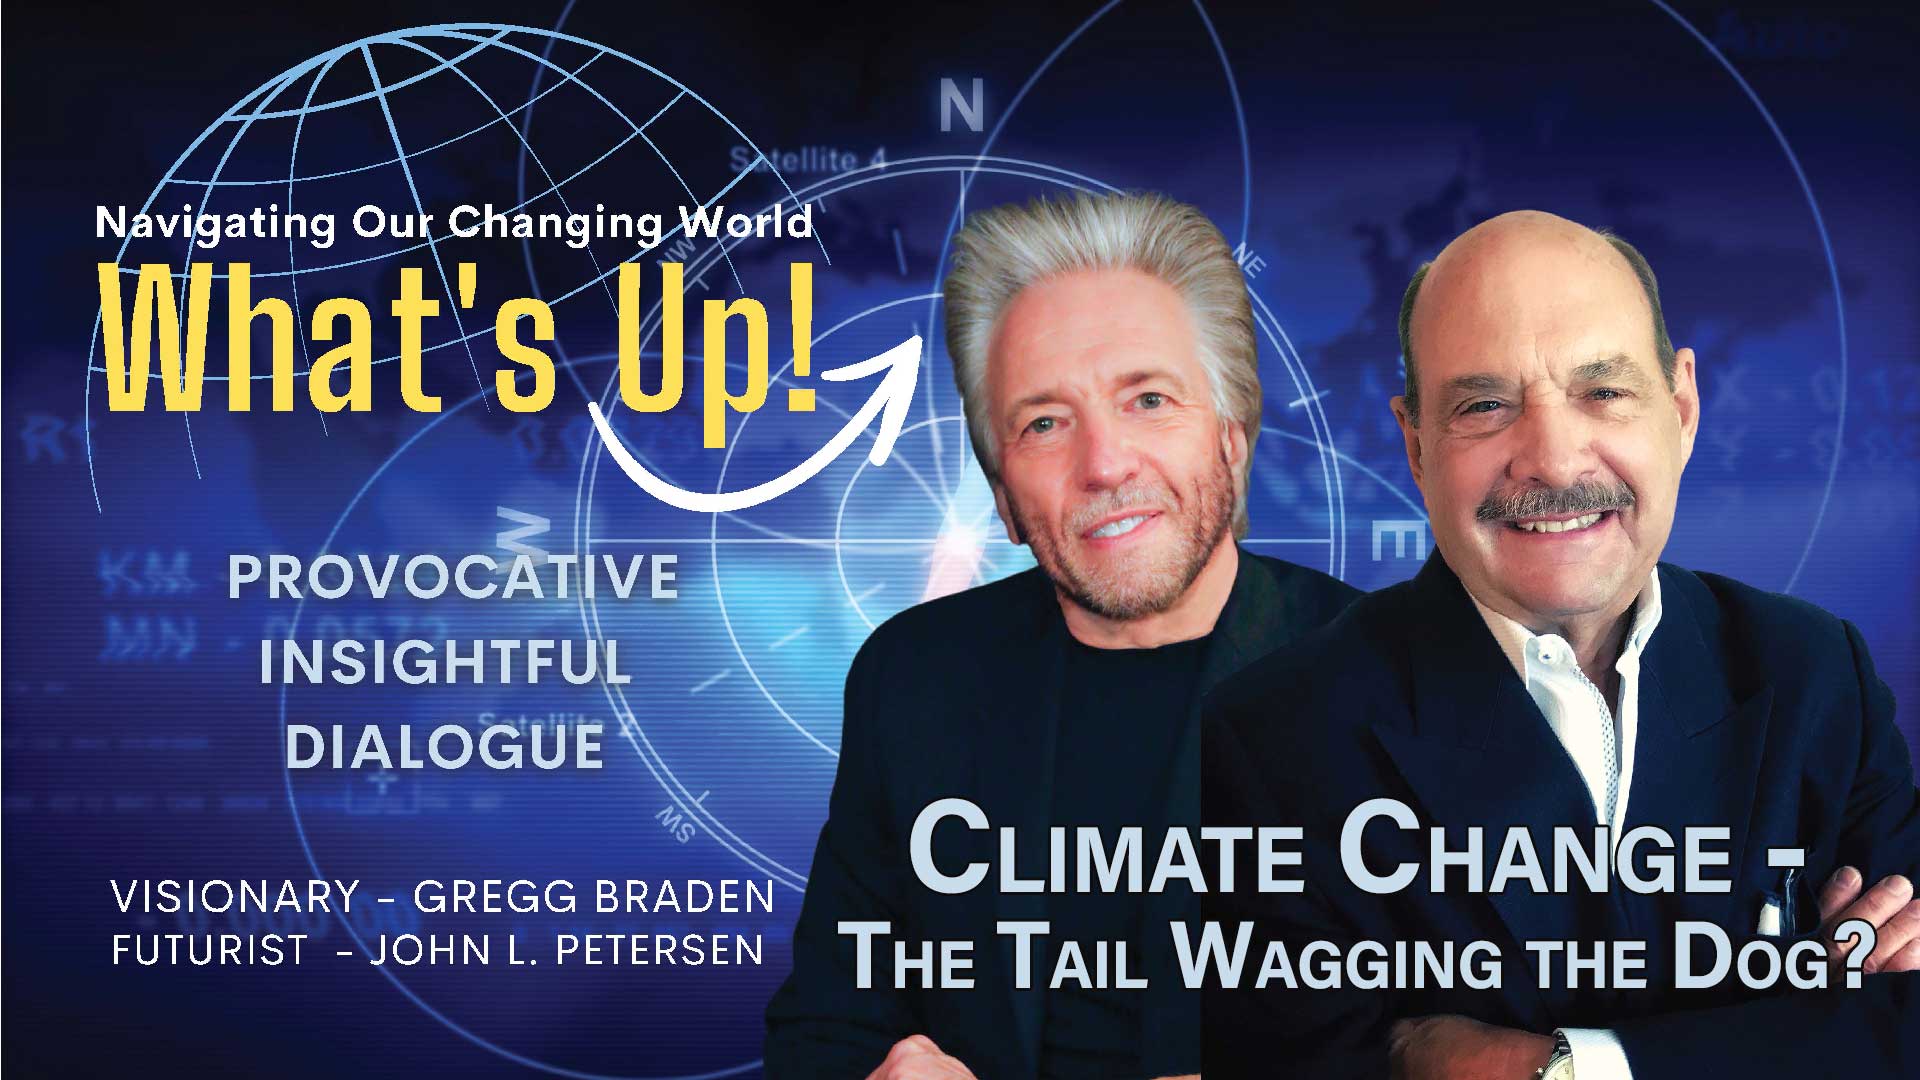 climate change - the tail wagging the dog with gregg braden and john petersen